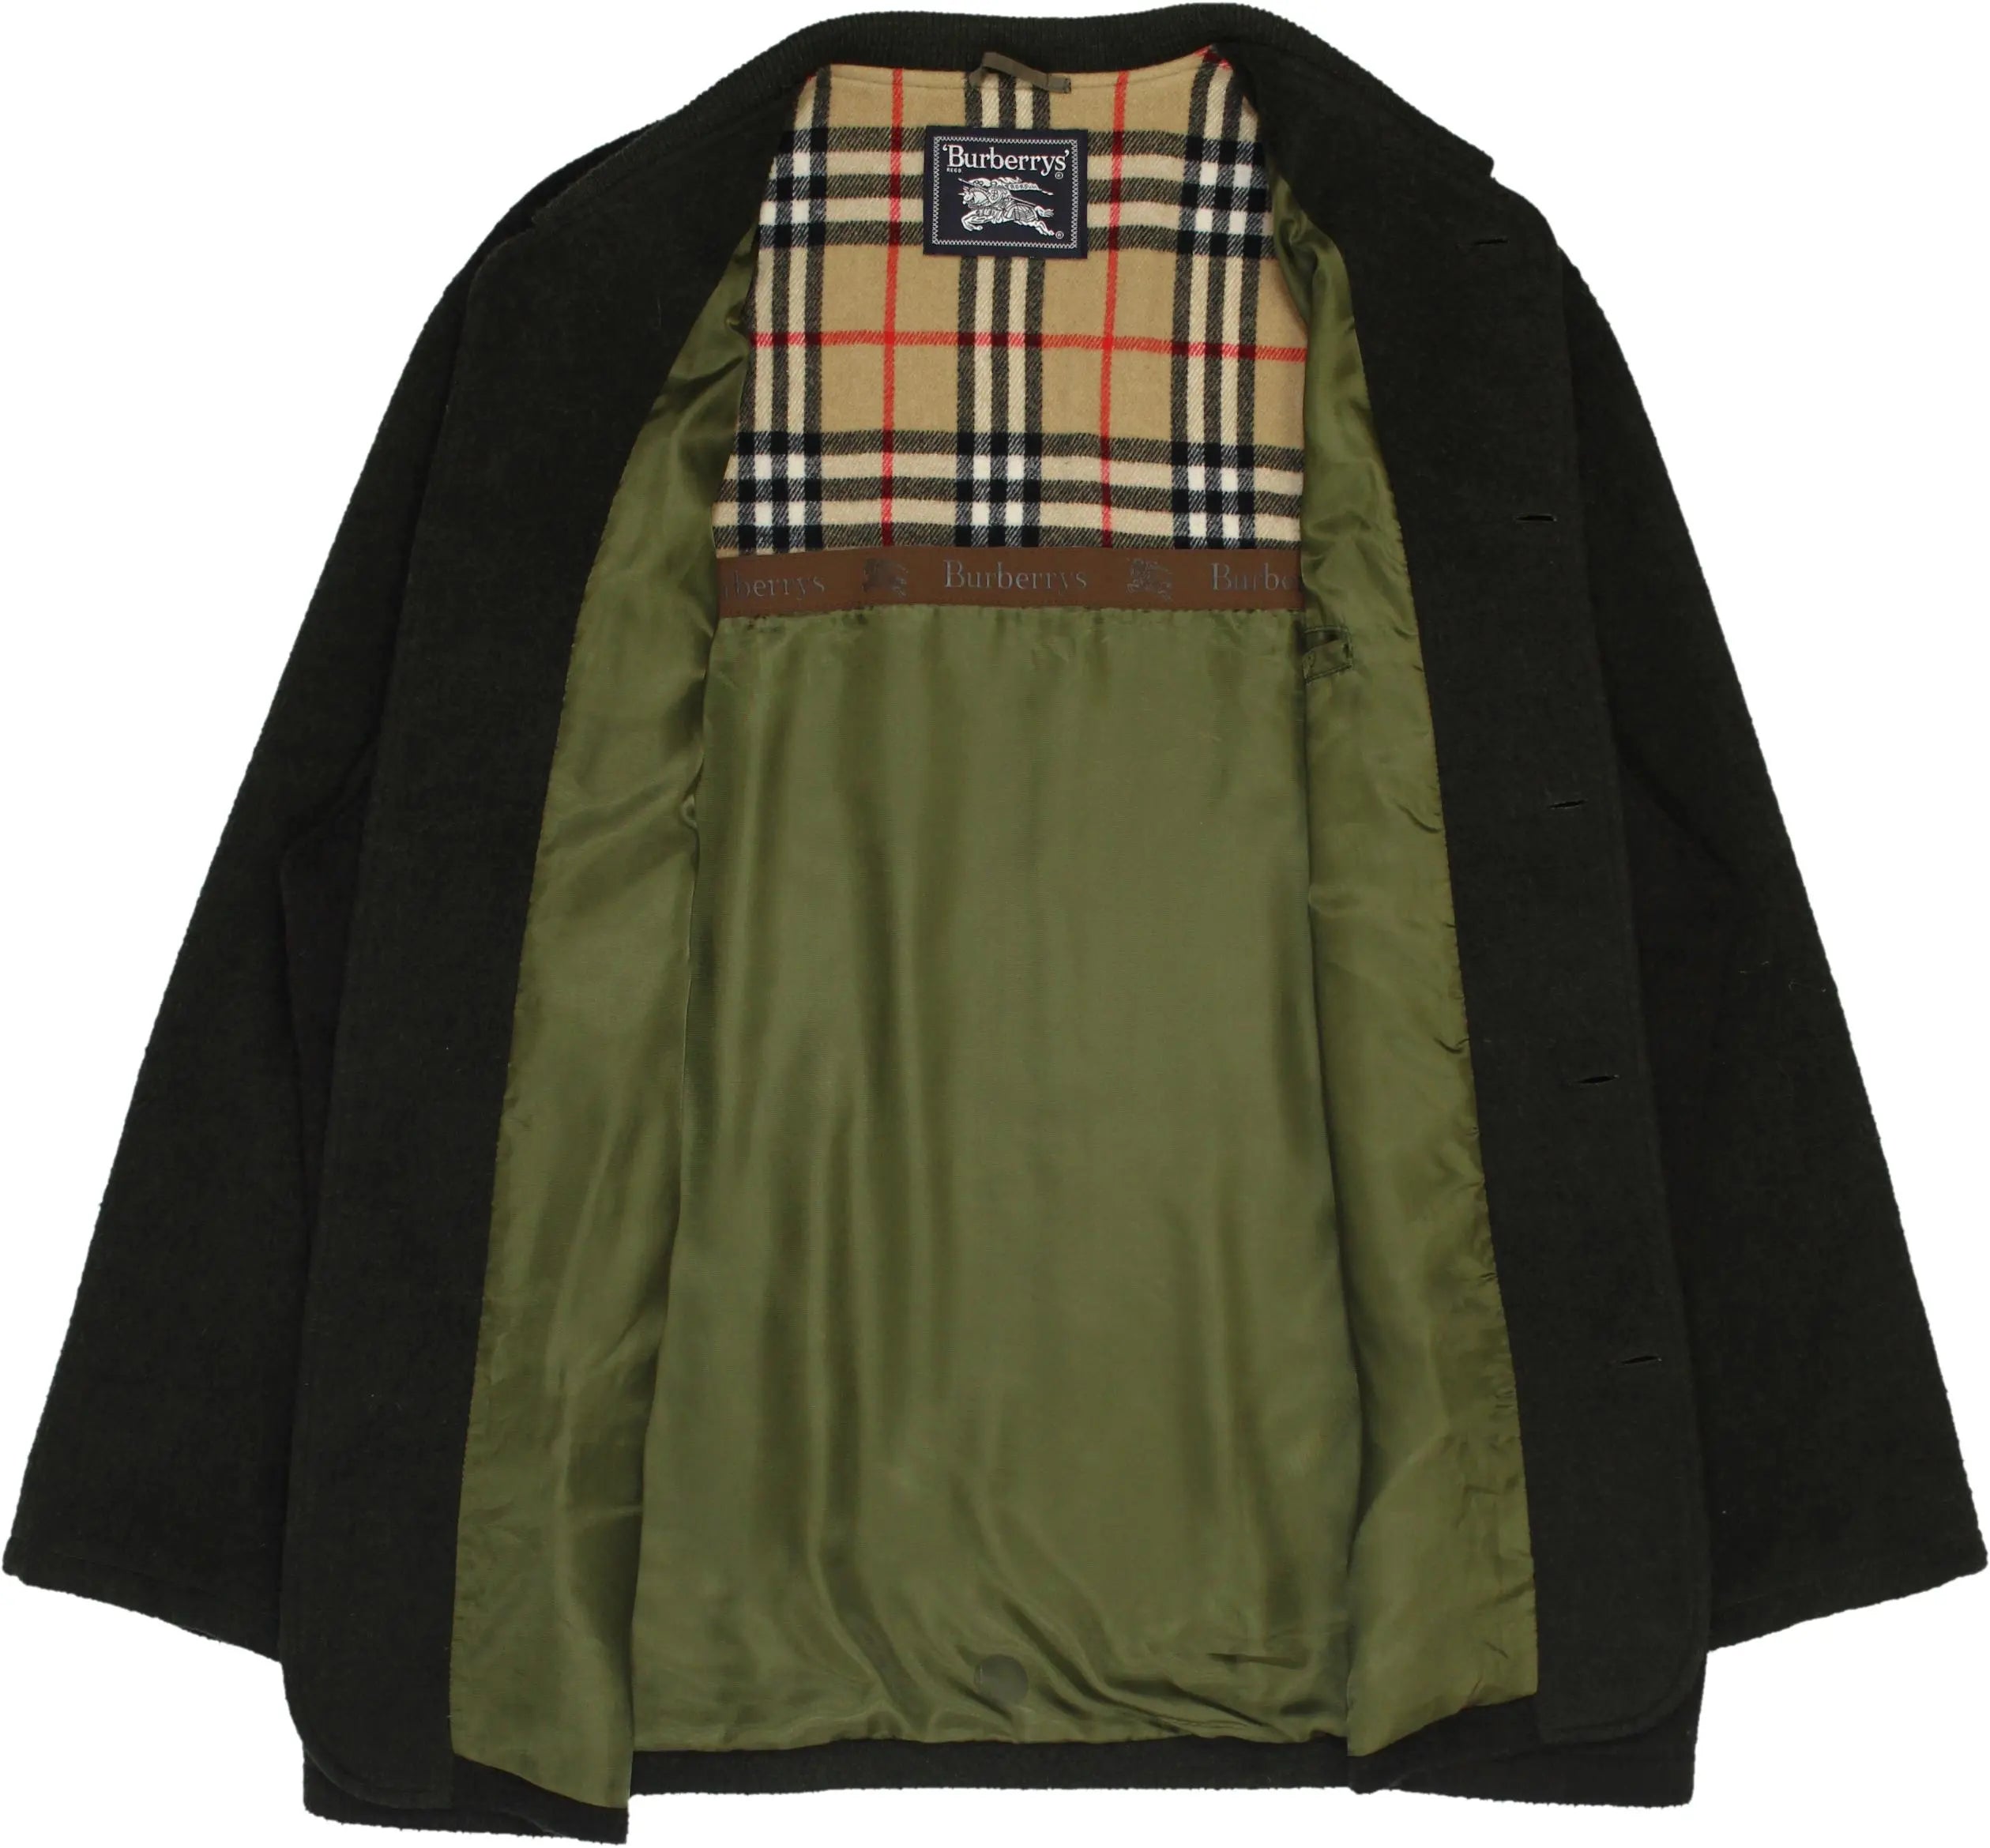 Burberry - Wool Coat by Burberry- ThriftTale.com - Vintage and second handclothing